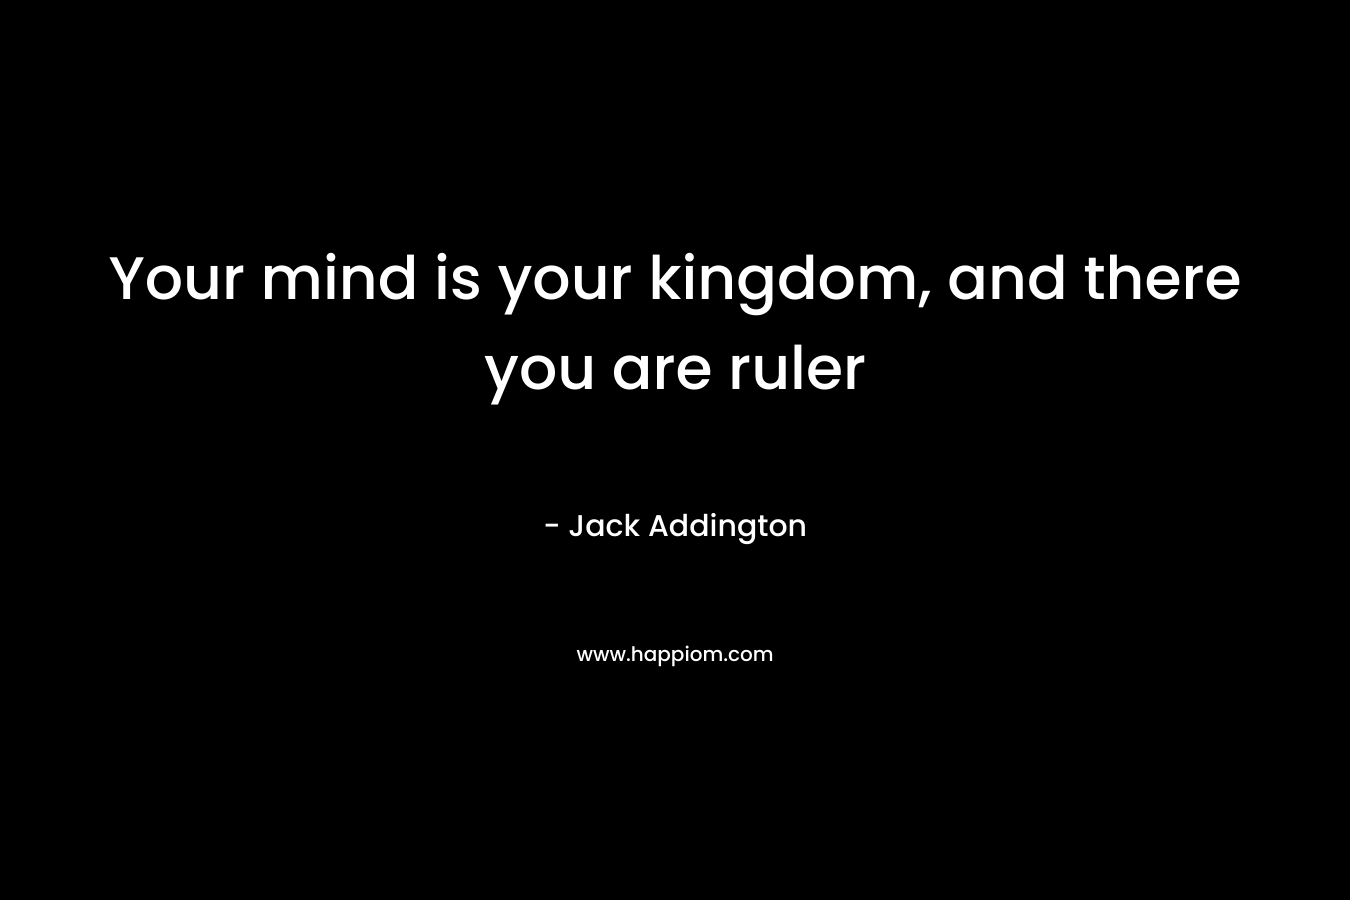 Your mind is your kingdom, and there you are ruler